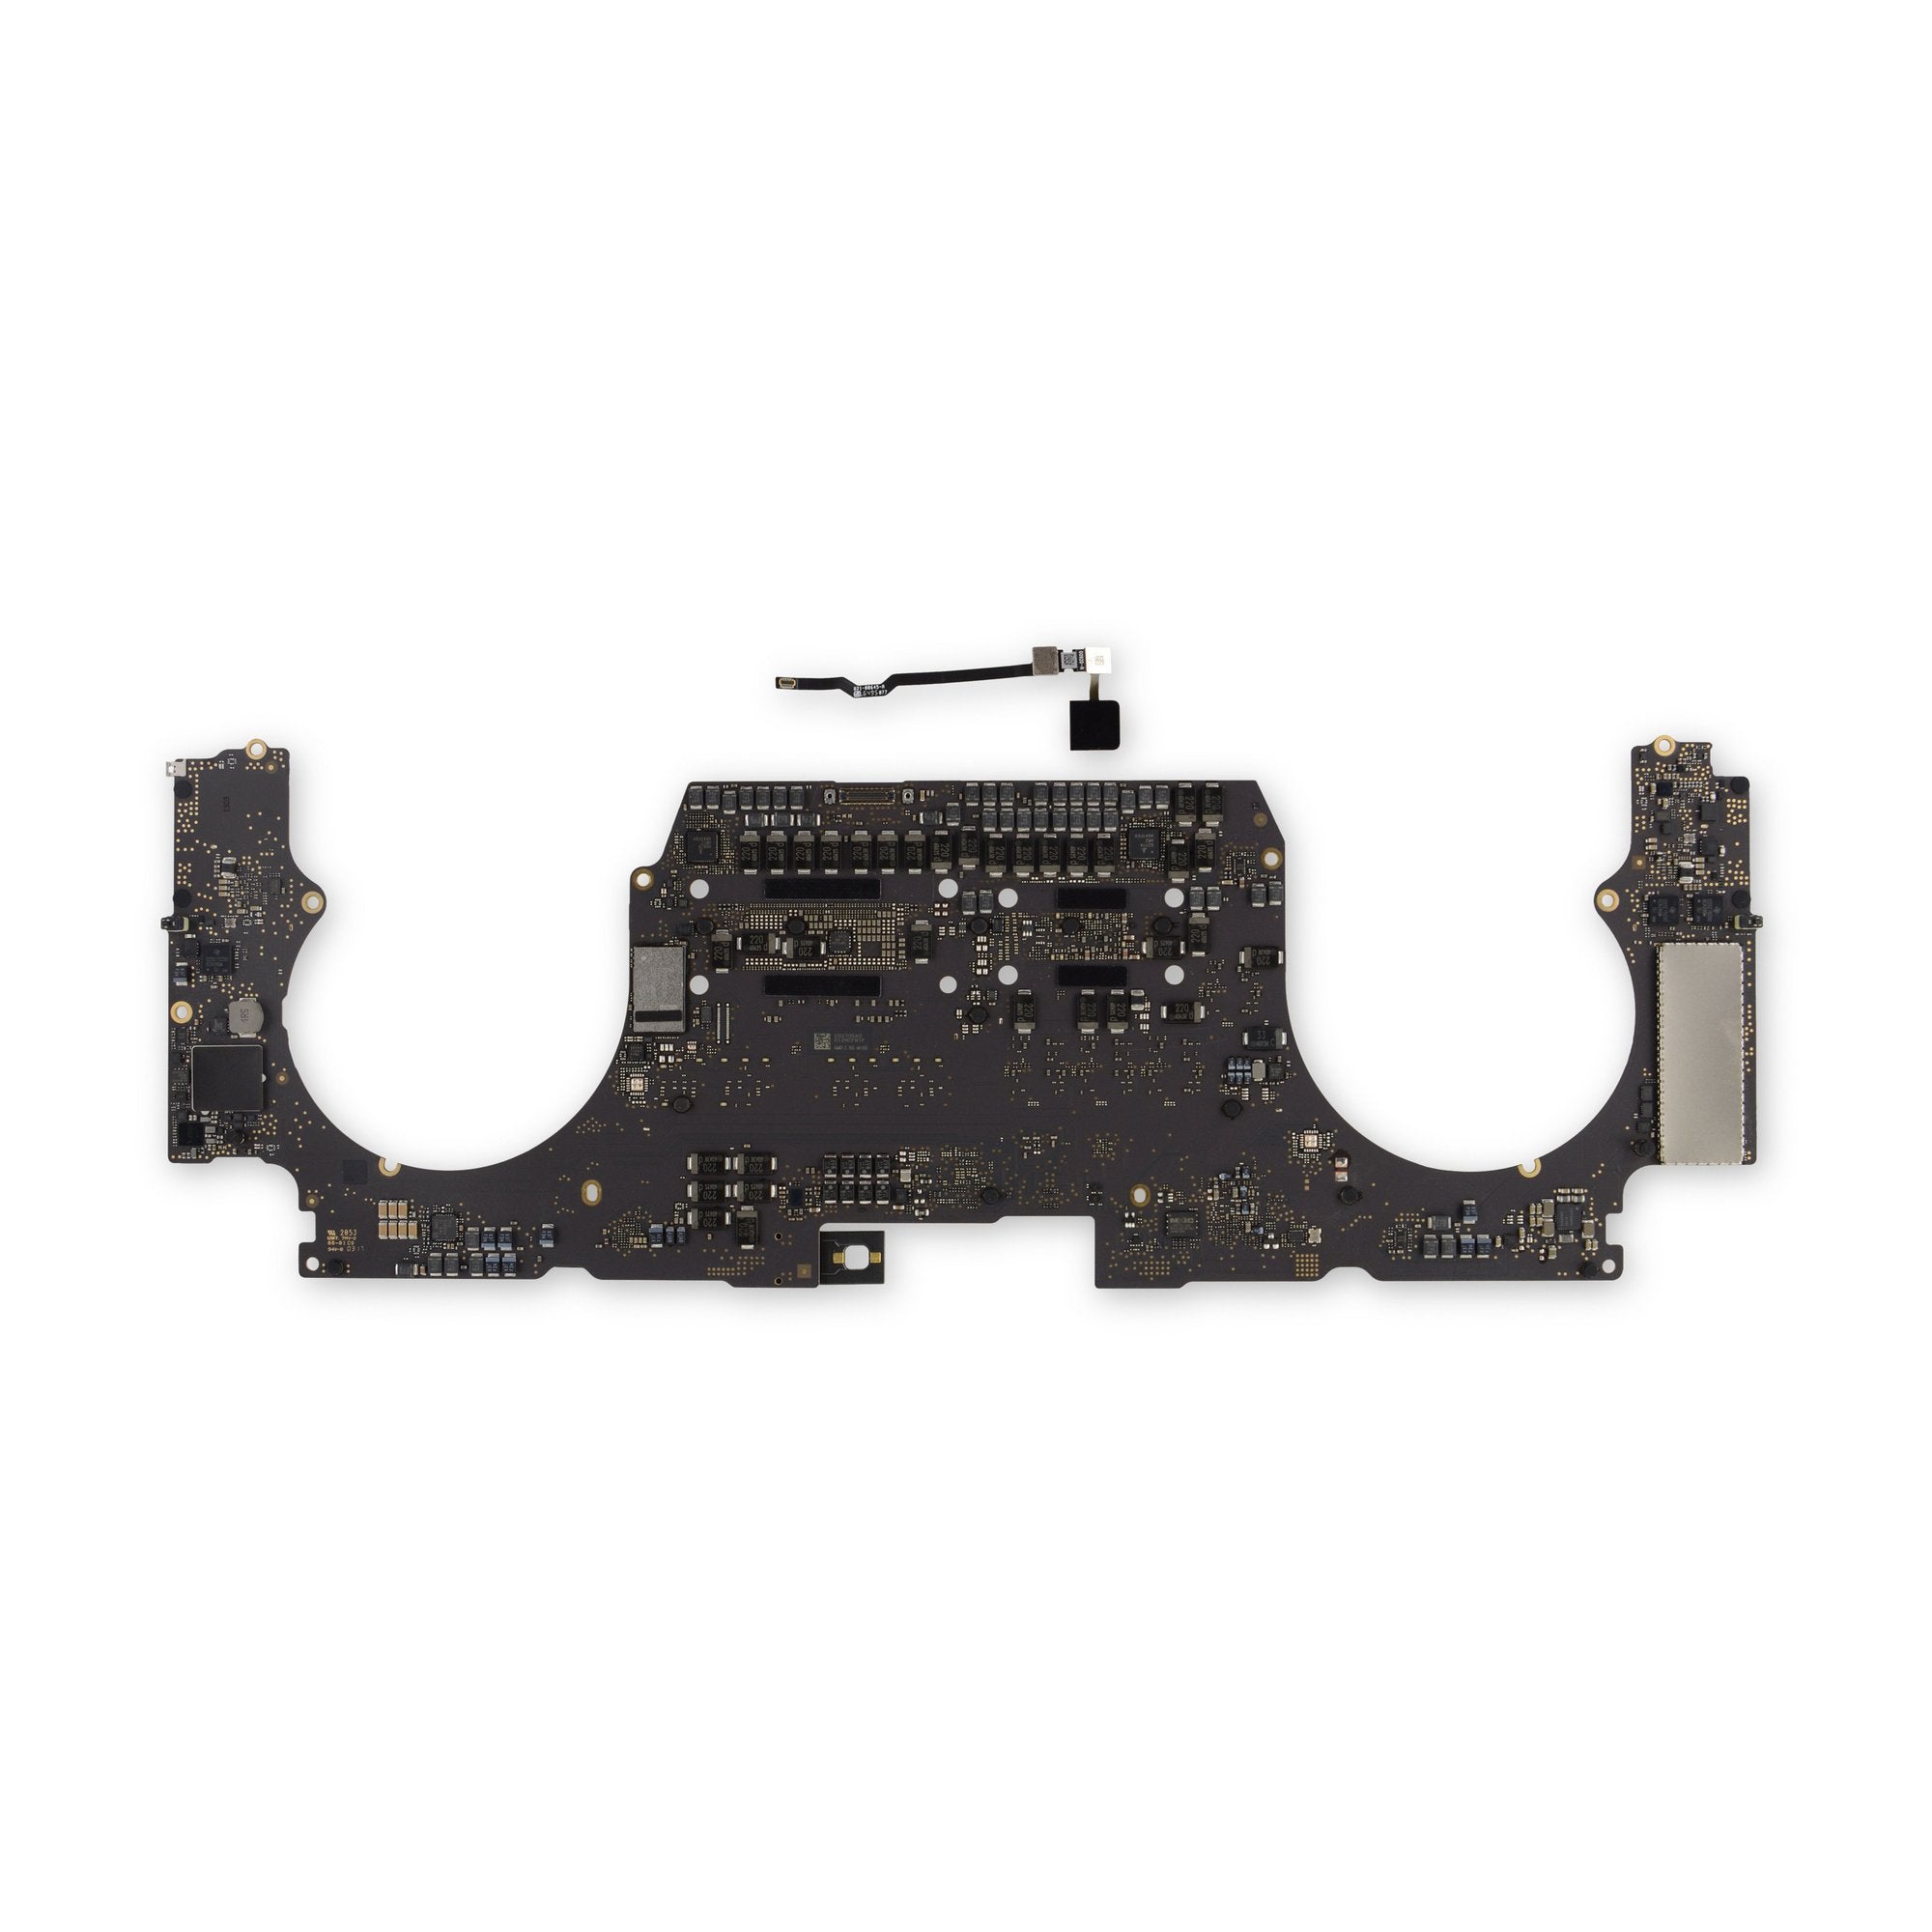 MacBook Pro 15" Retina (Late 2016) 2.6 GHz Logic Board, Radeon Pro 450, with Paired Touch ID Sensor 512 GB Used